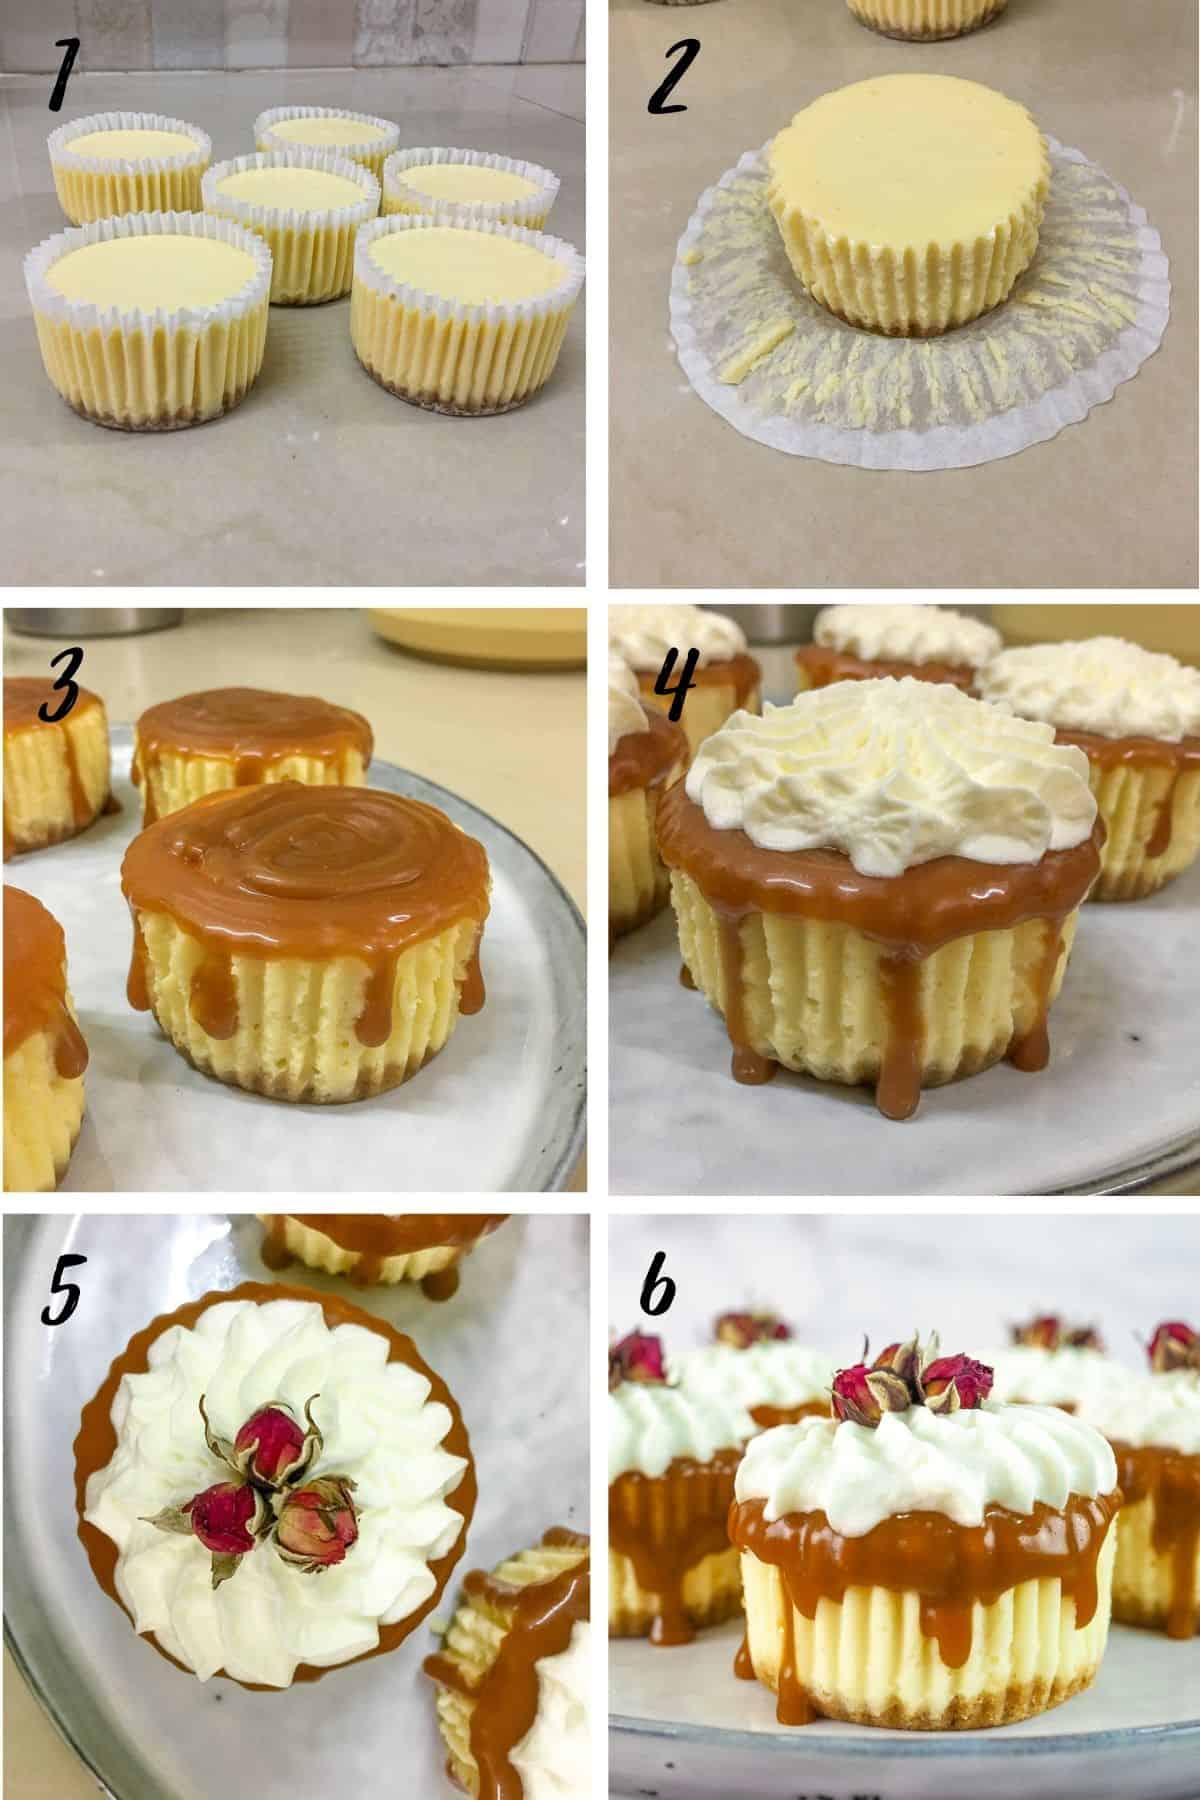 A poster of 6 images showing how to decorate mini salted caramel cheesecakes with salted caramel sauce, whipped cream and dried rose buds